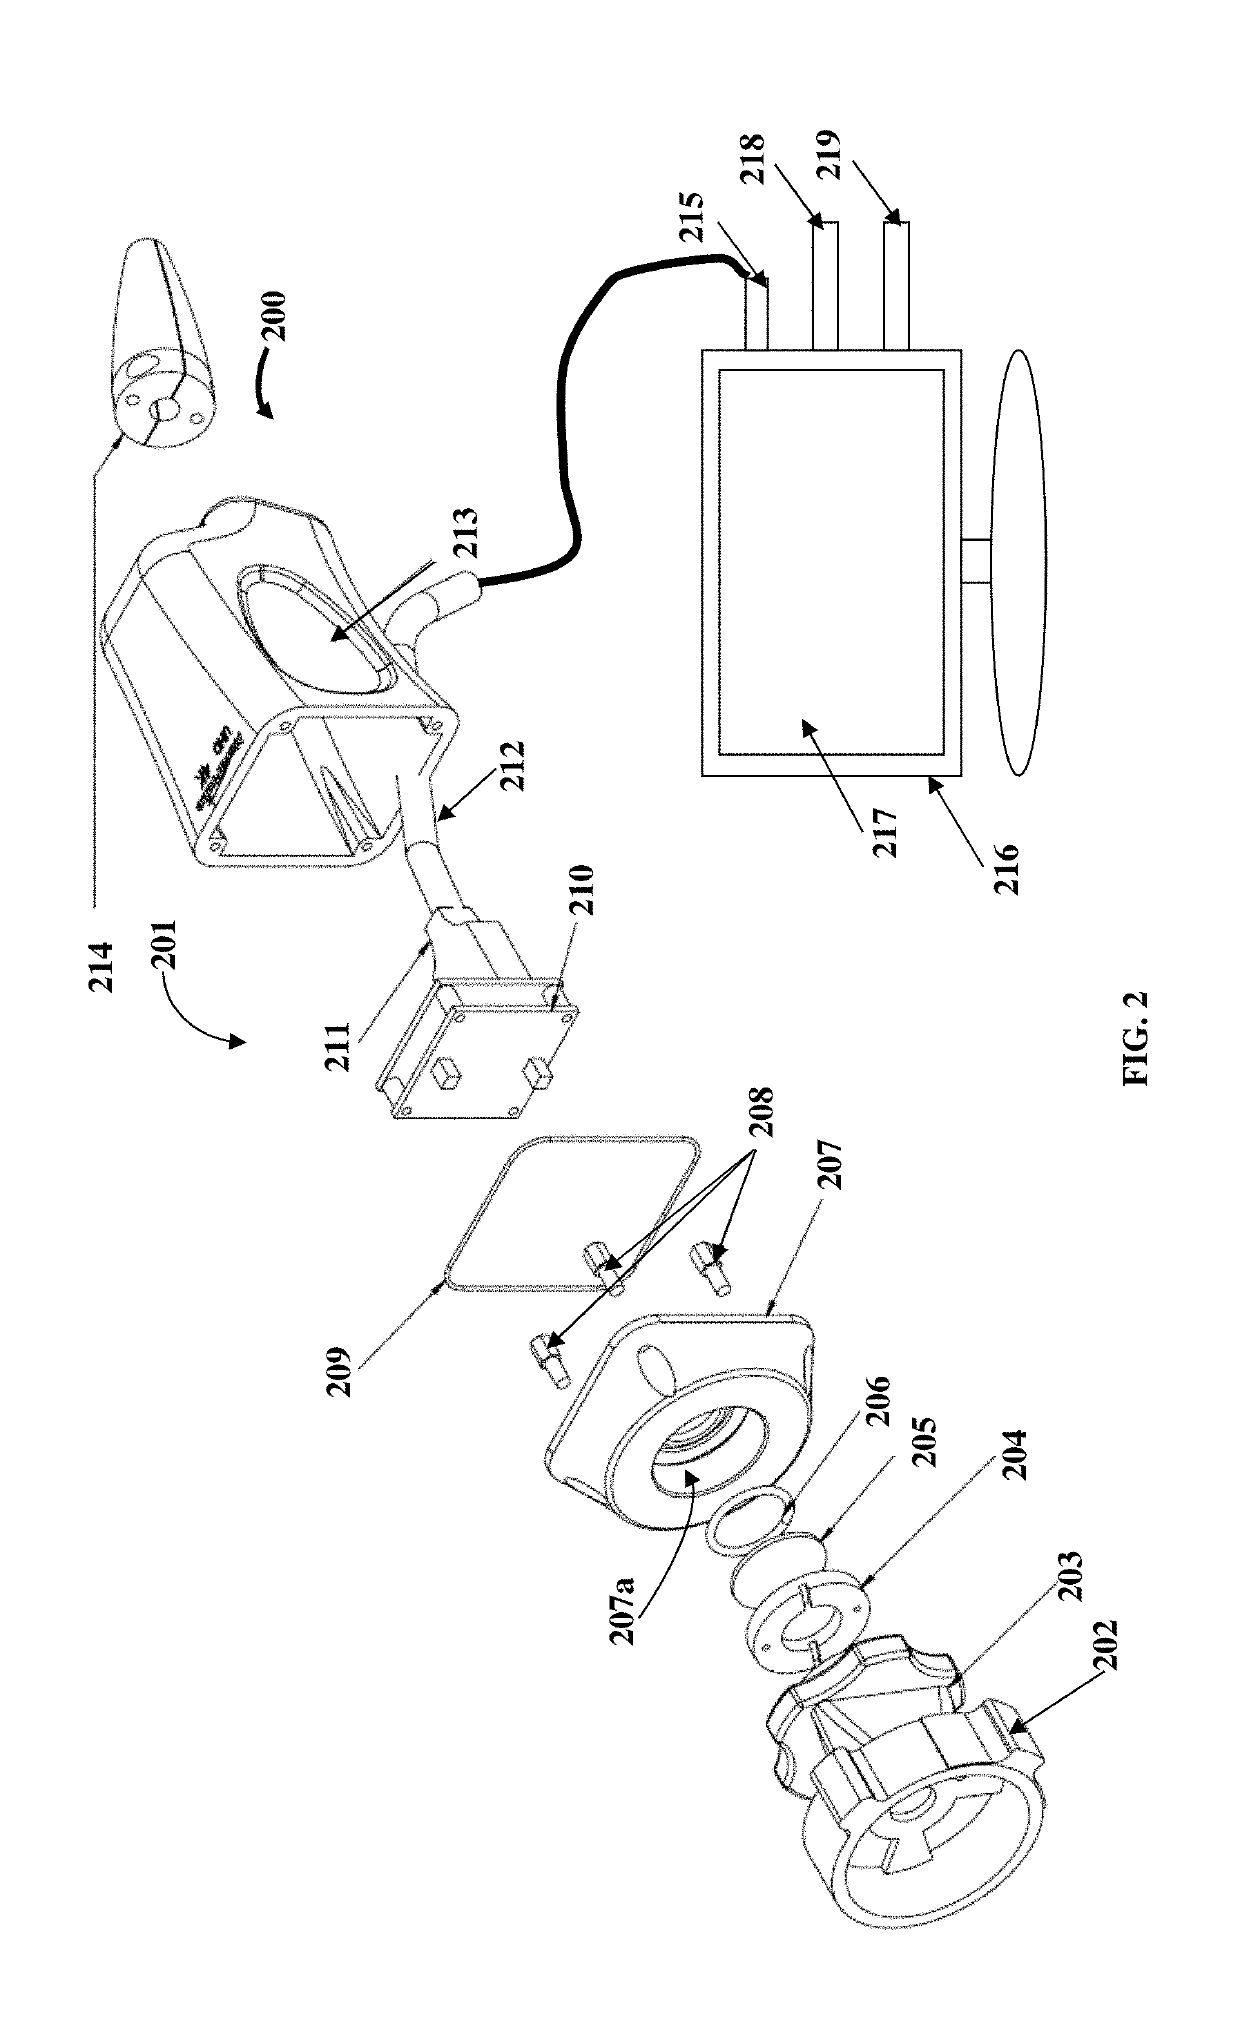 Surgical Visualization And Recording System